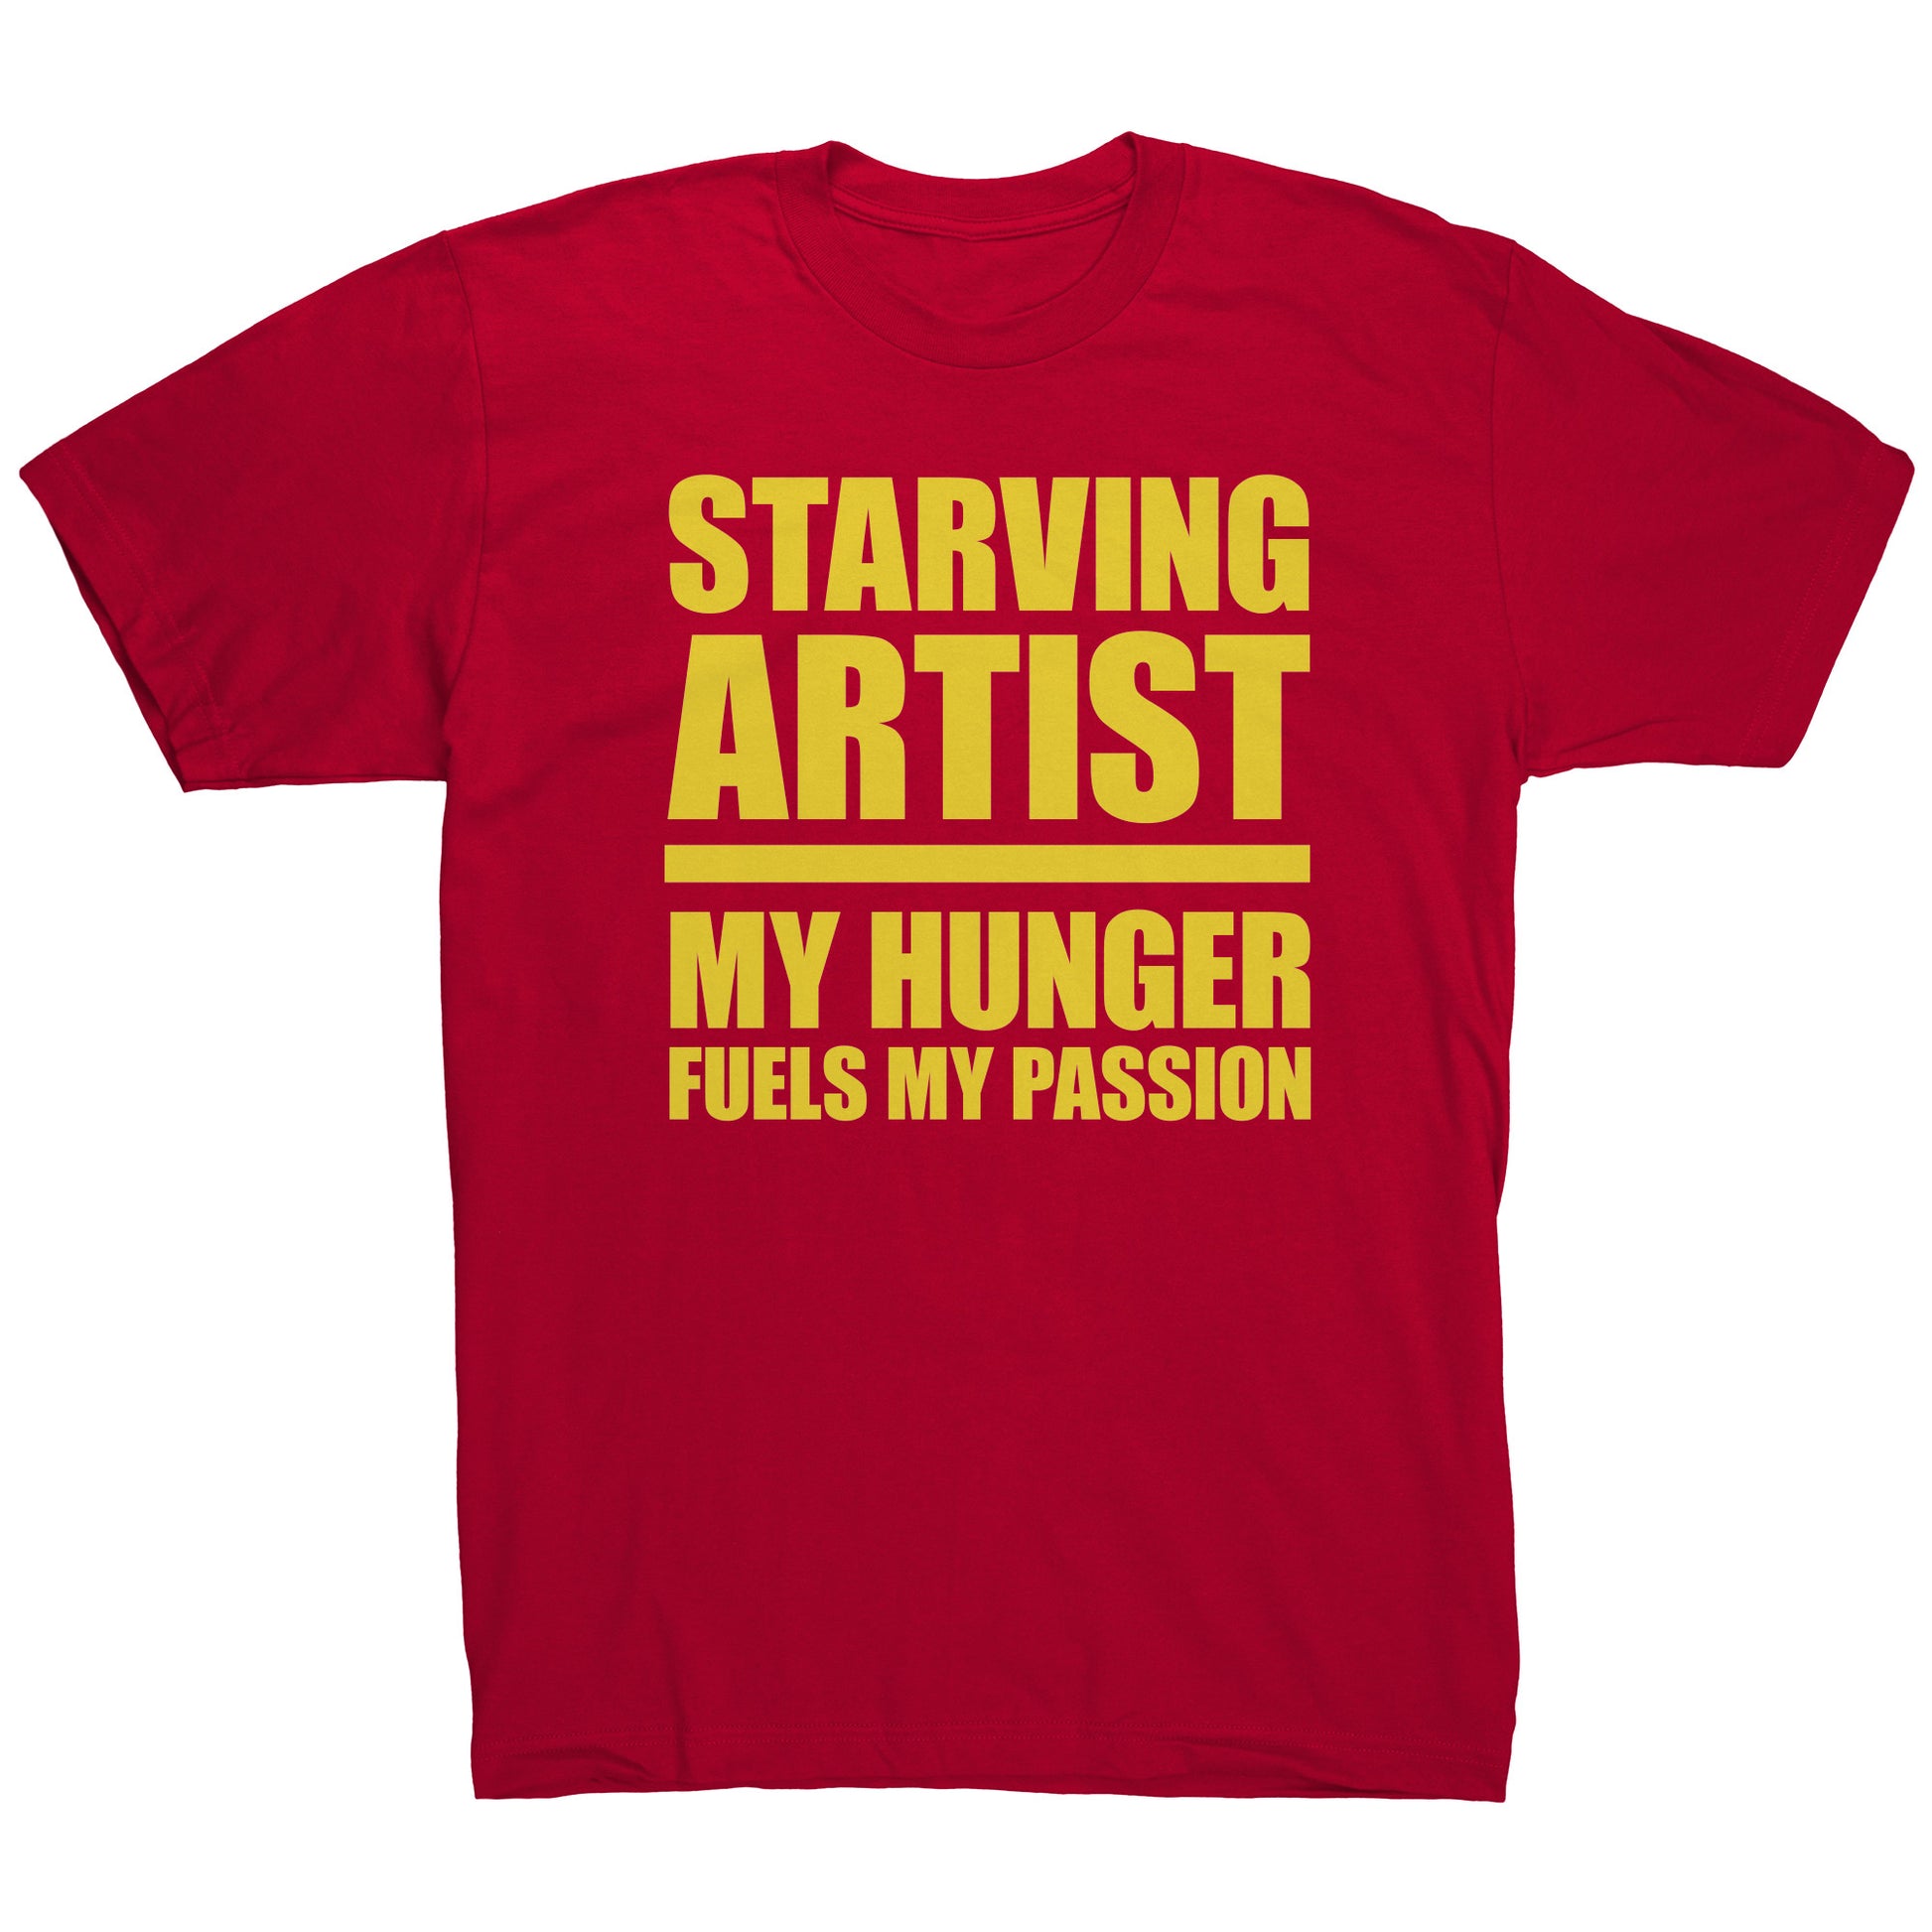 the best shirts, hoodies, and apparel for artists